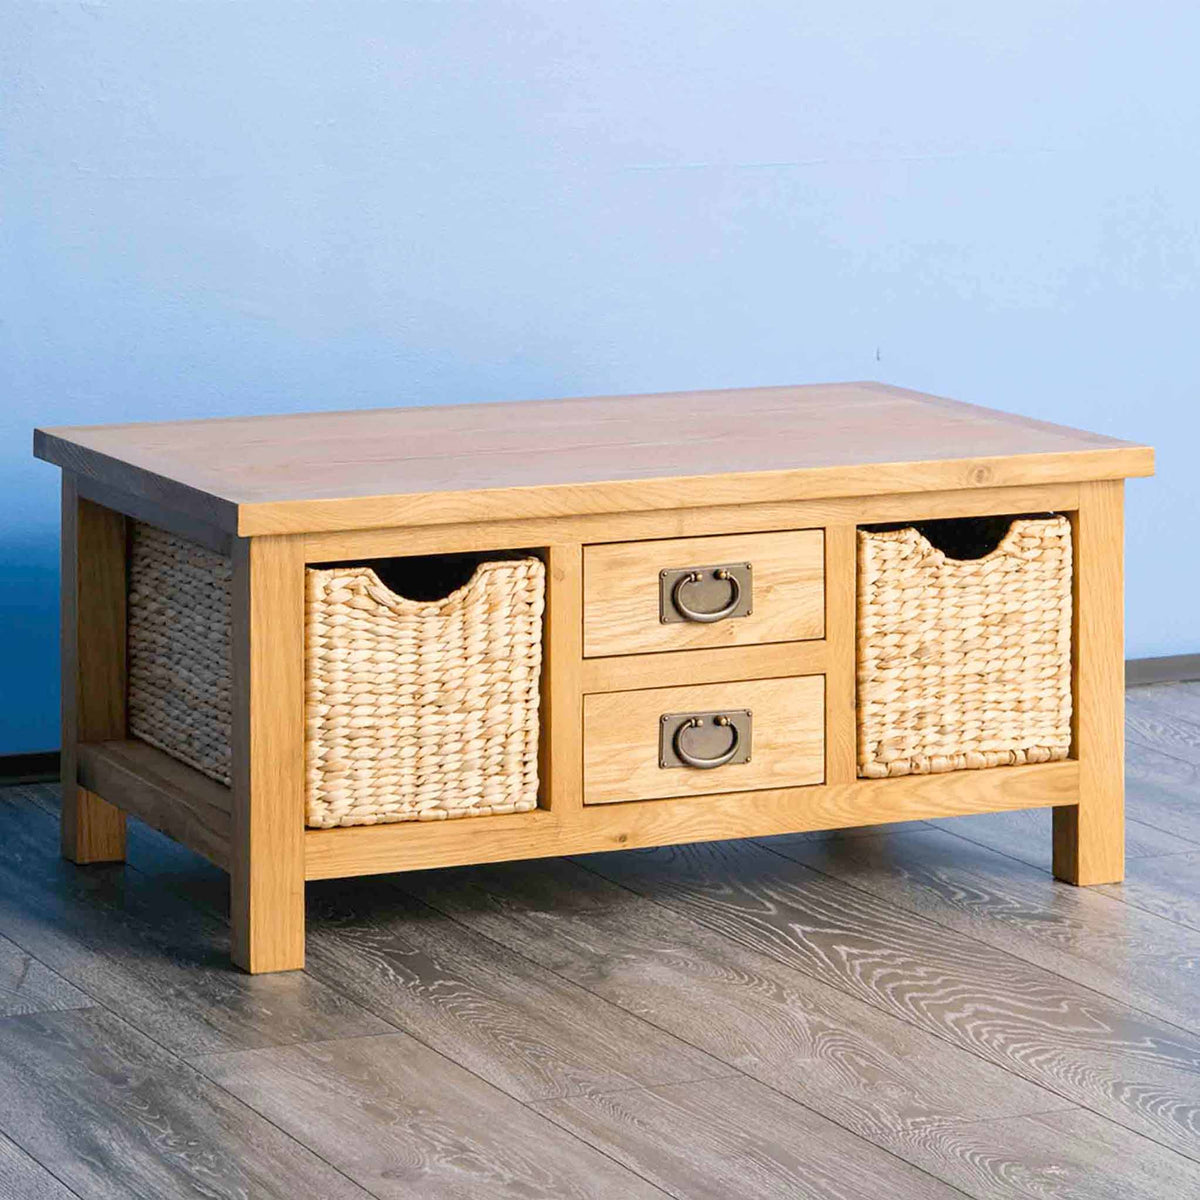 Surrey Oak Coffee Table with Baskets - Lifestyle side view